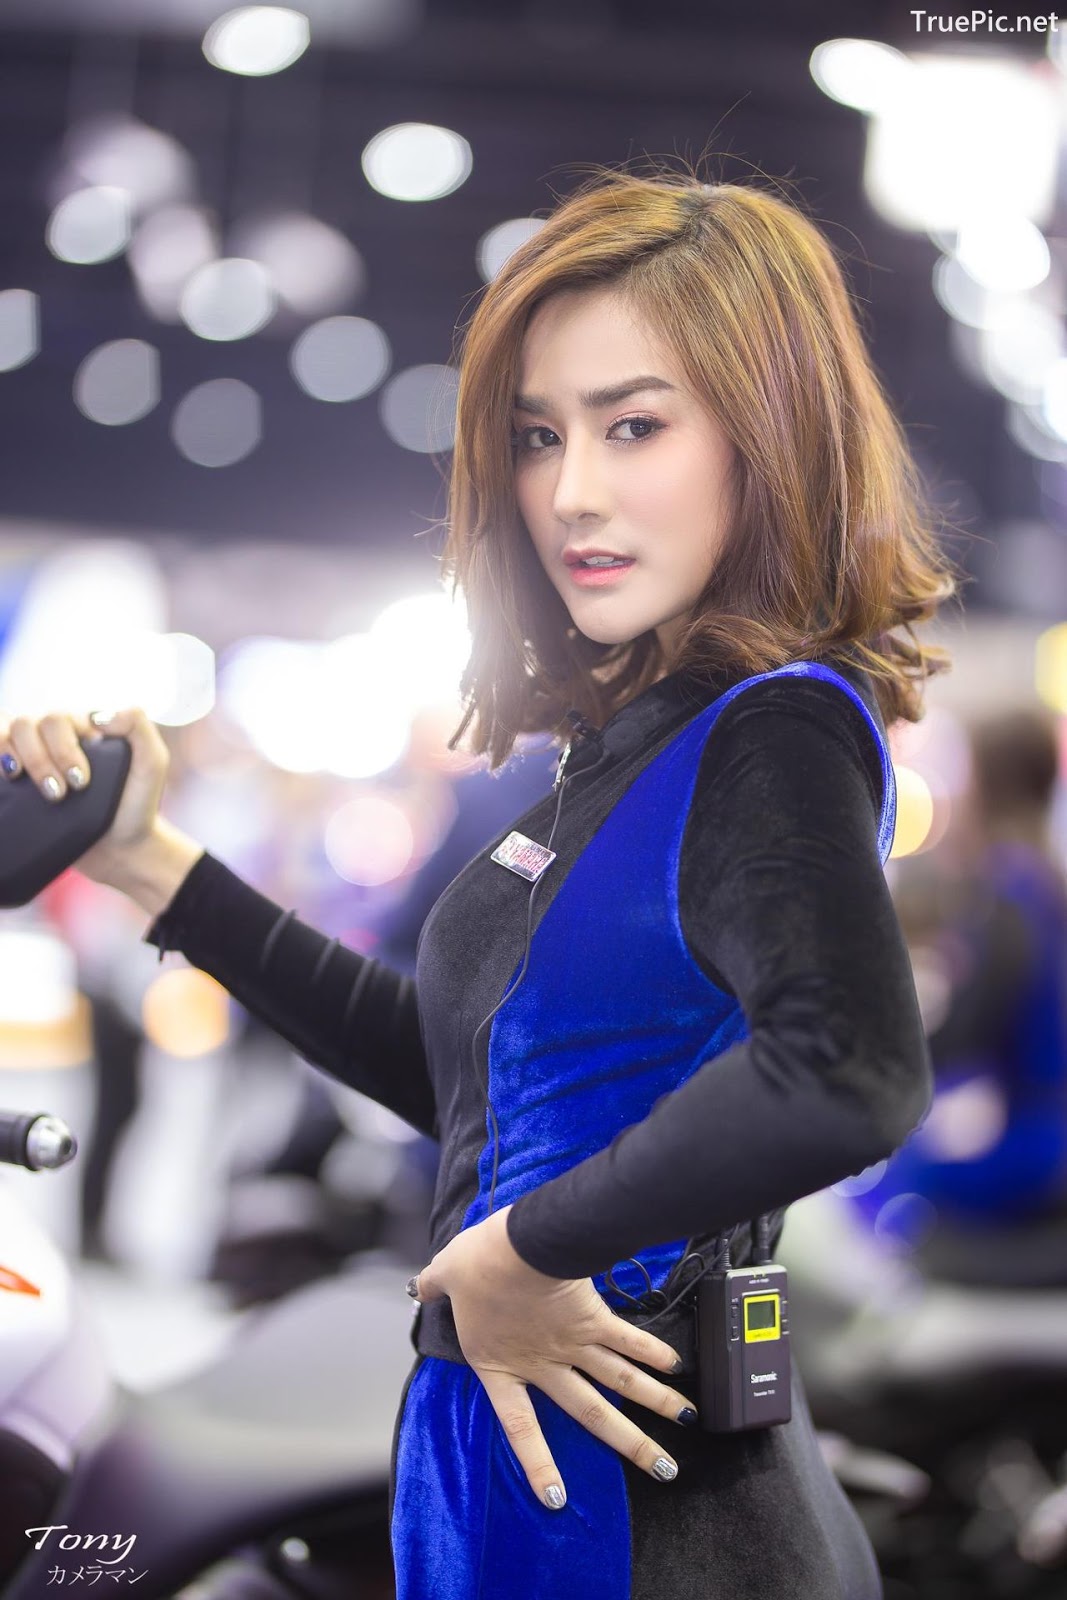 Image-Thailand-Hot-Model-Thai-Racing-Girl-At-Motor-Expo-2018-TruePic.net- Picture-21